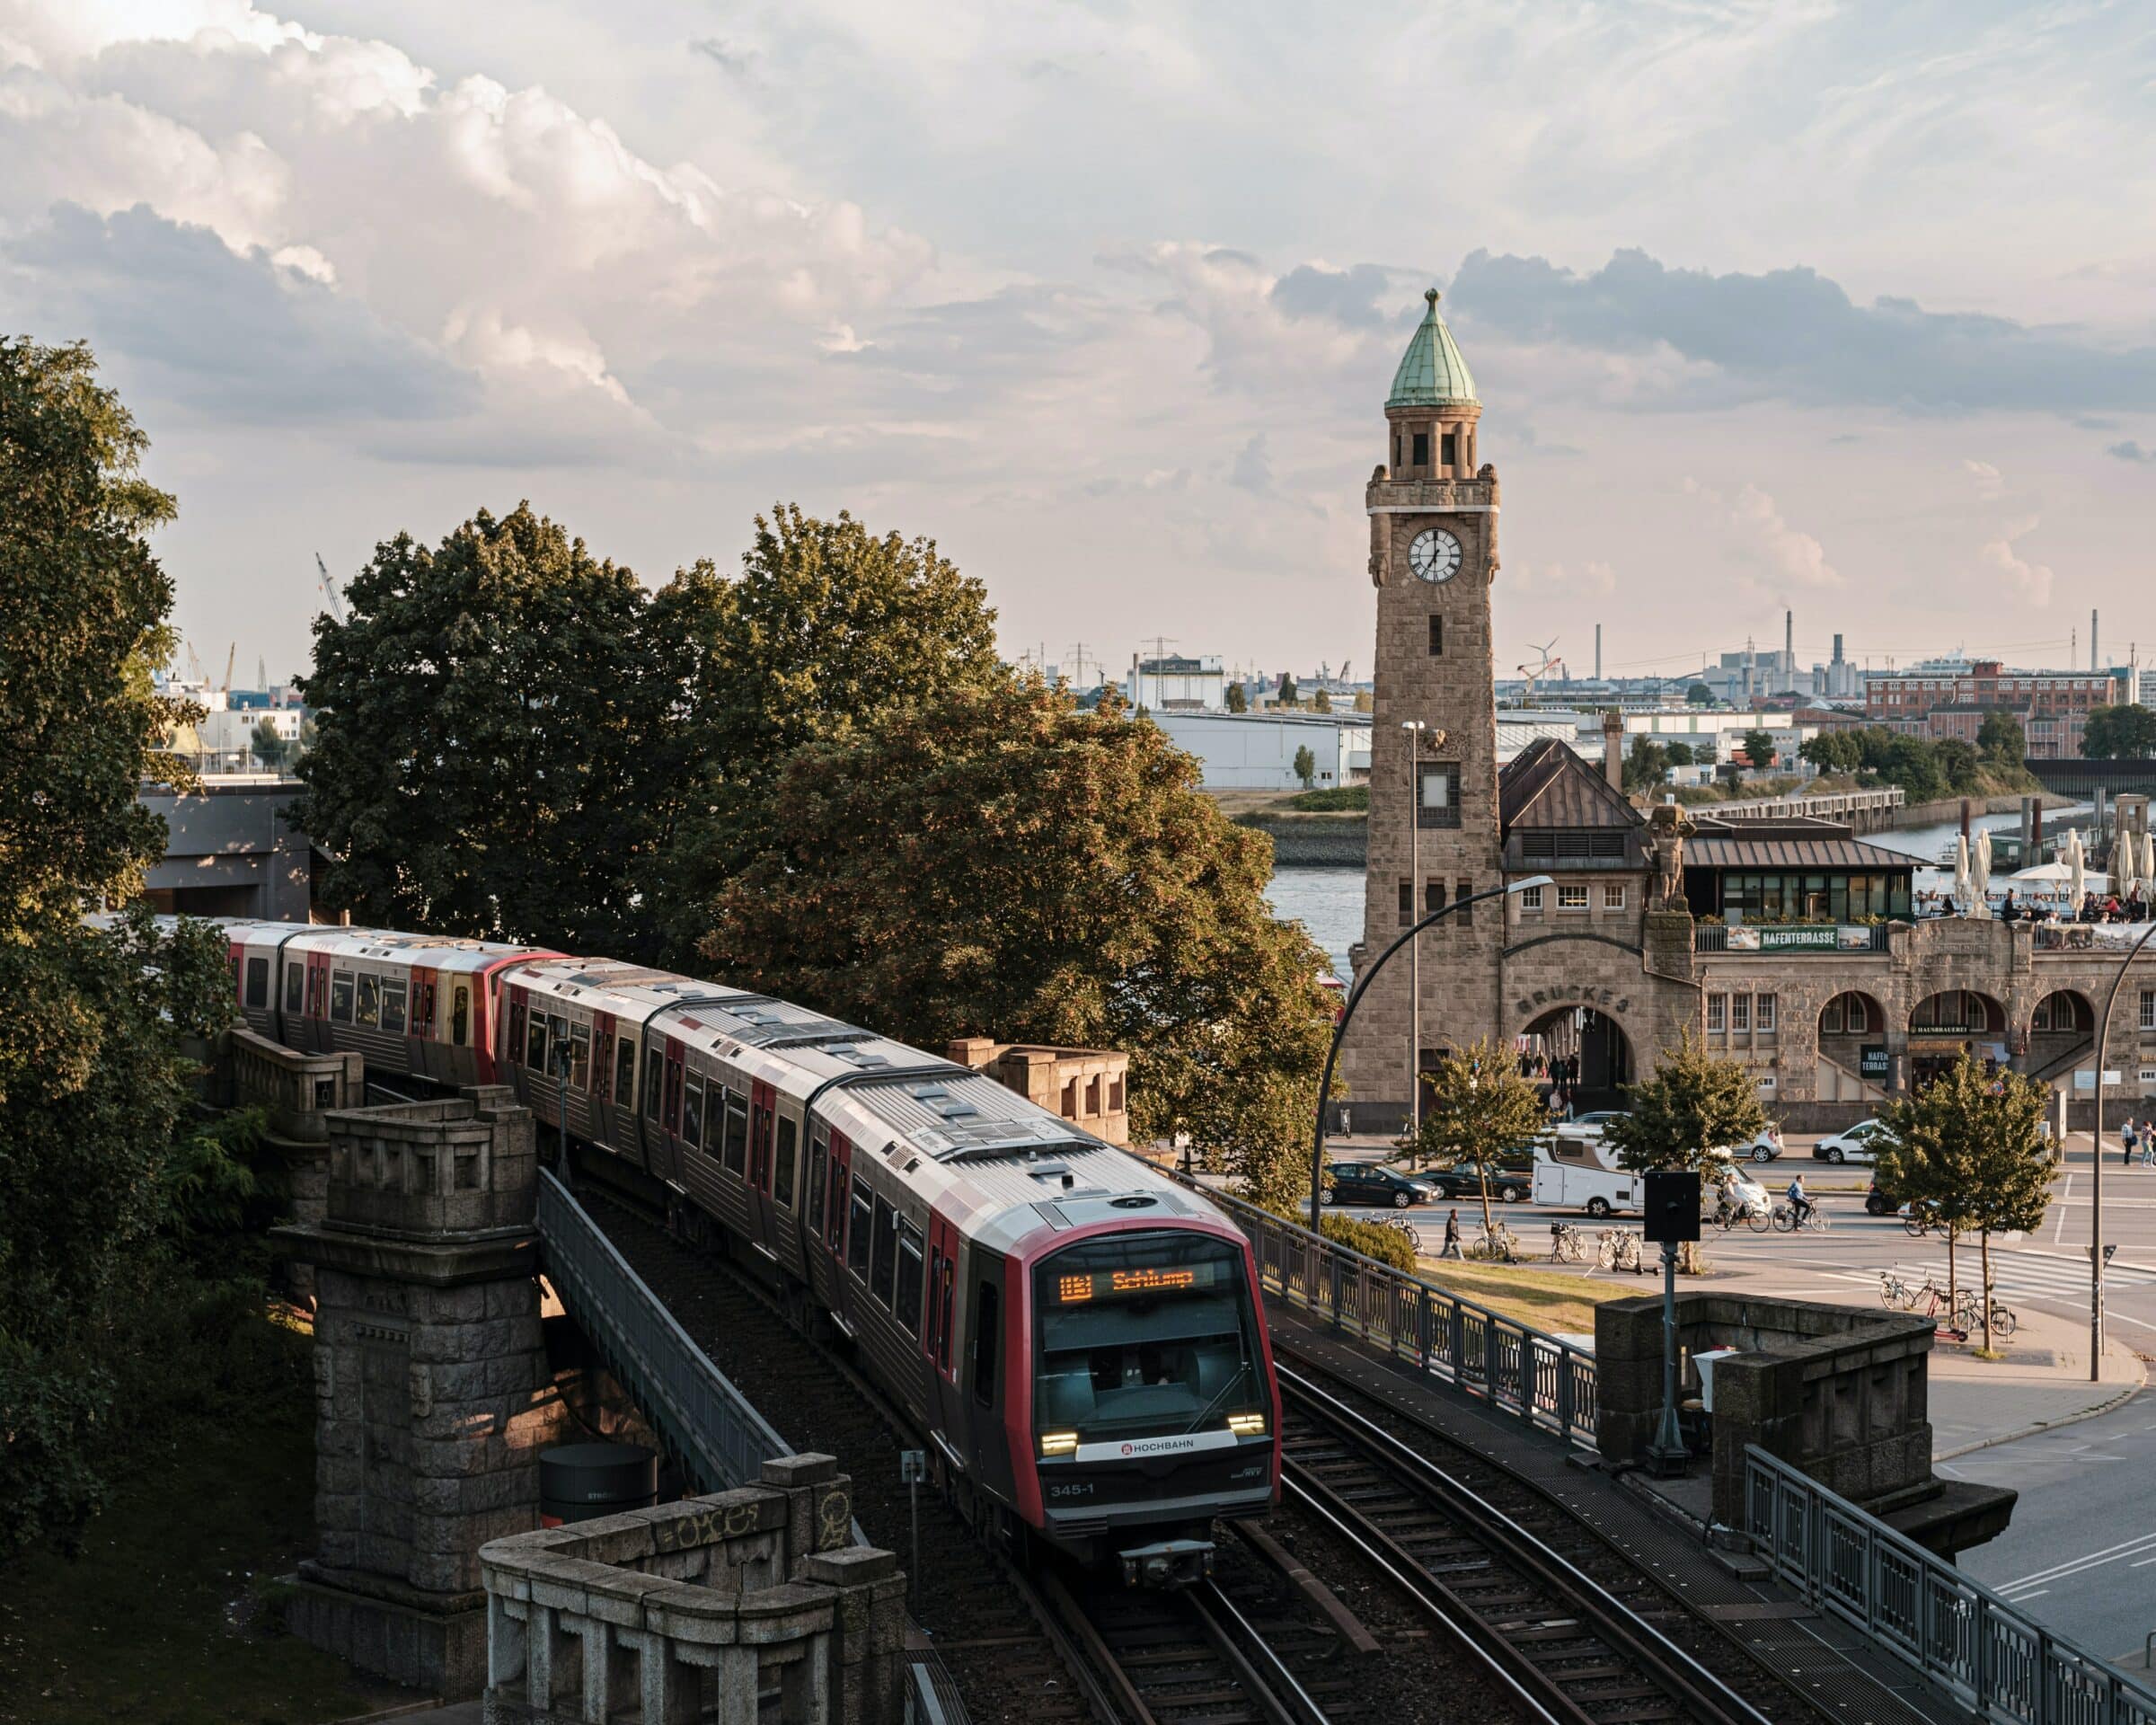 Train going through a city in Germany